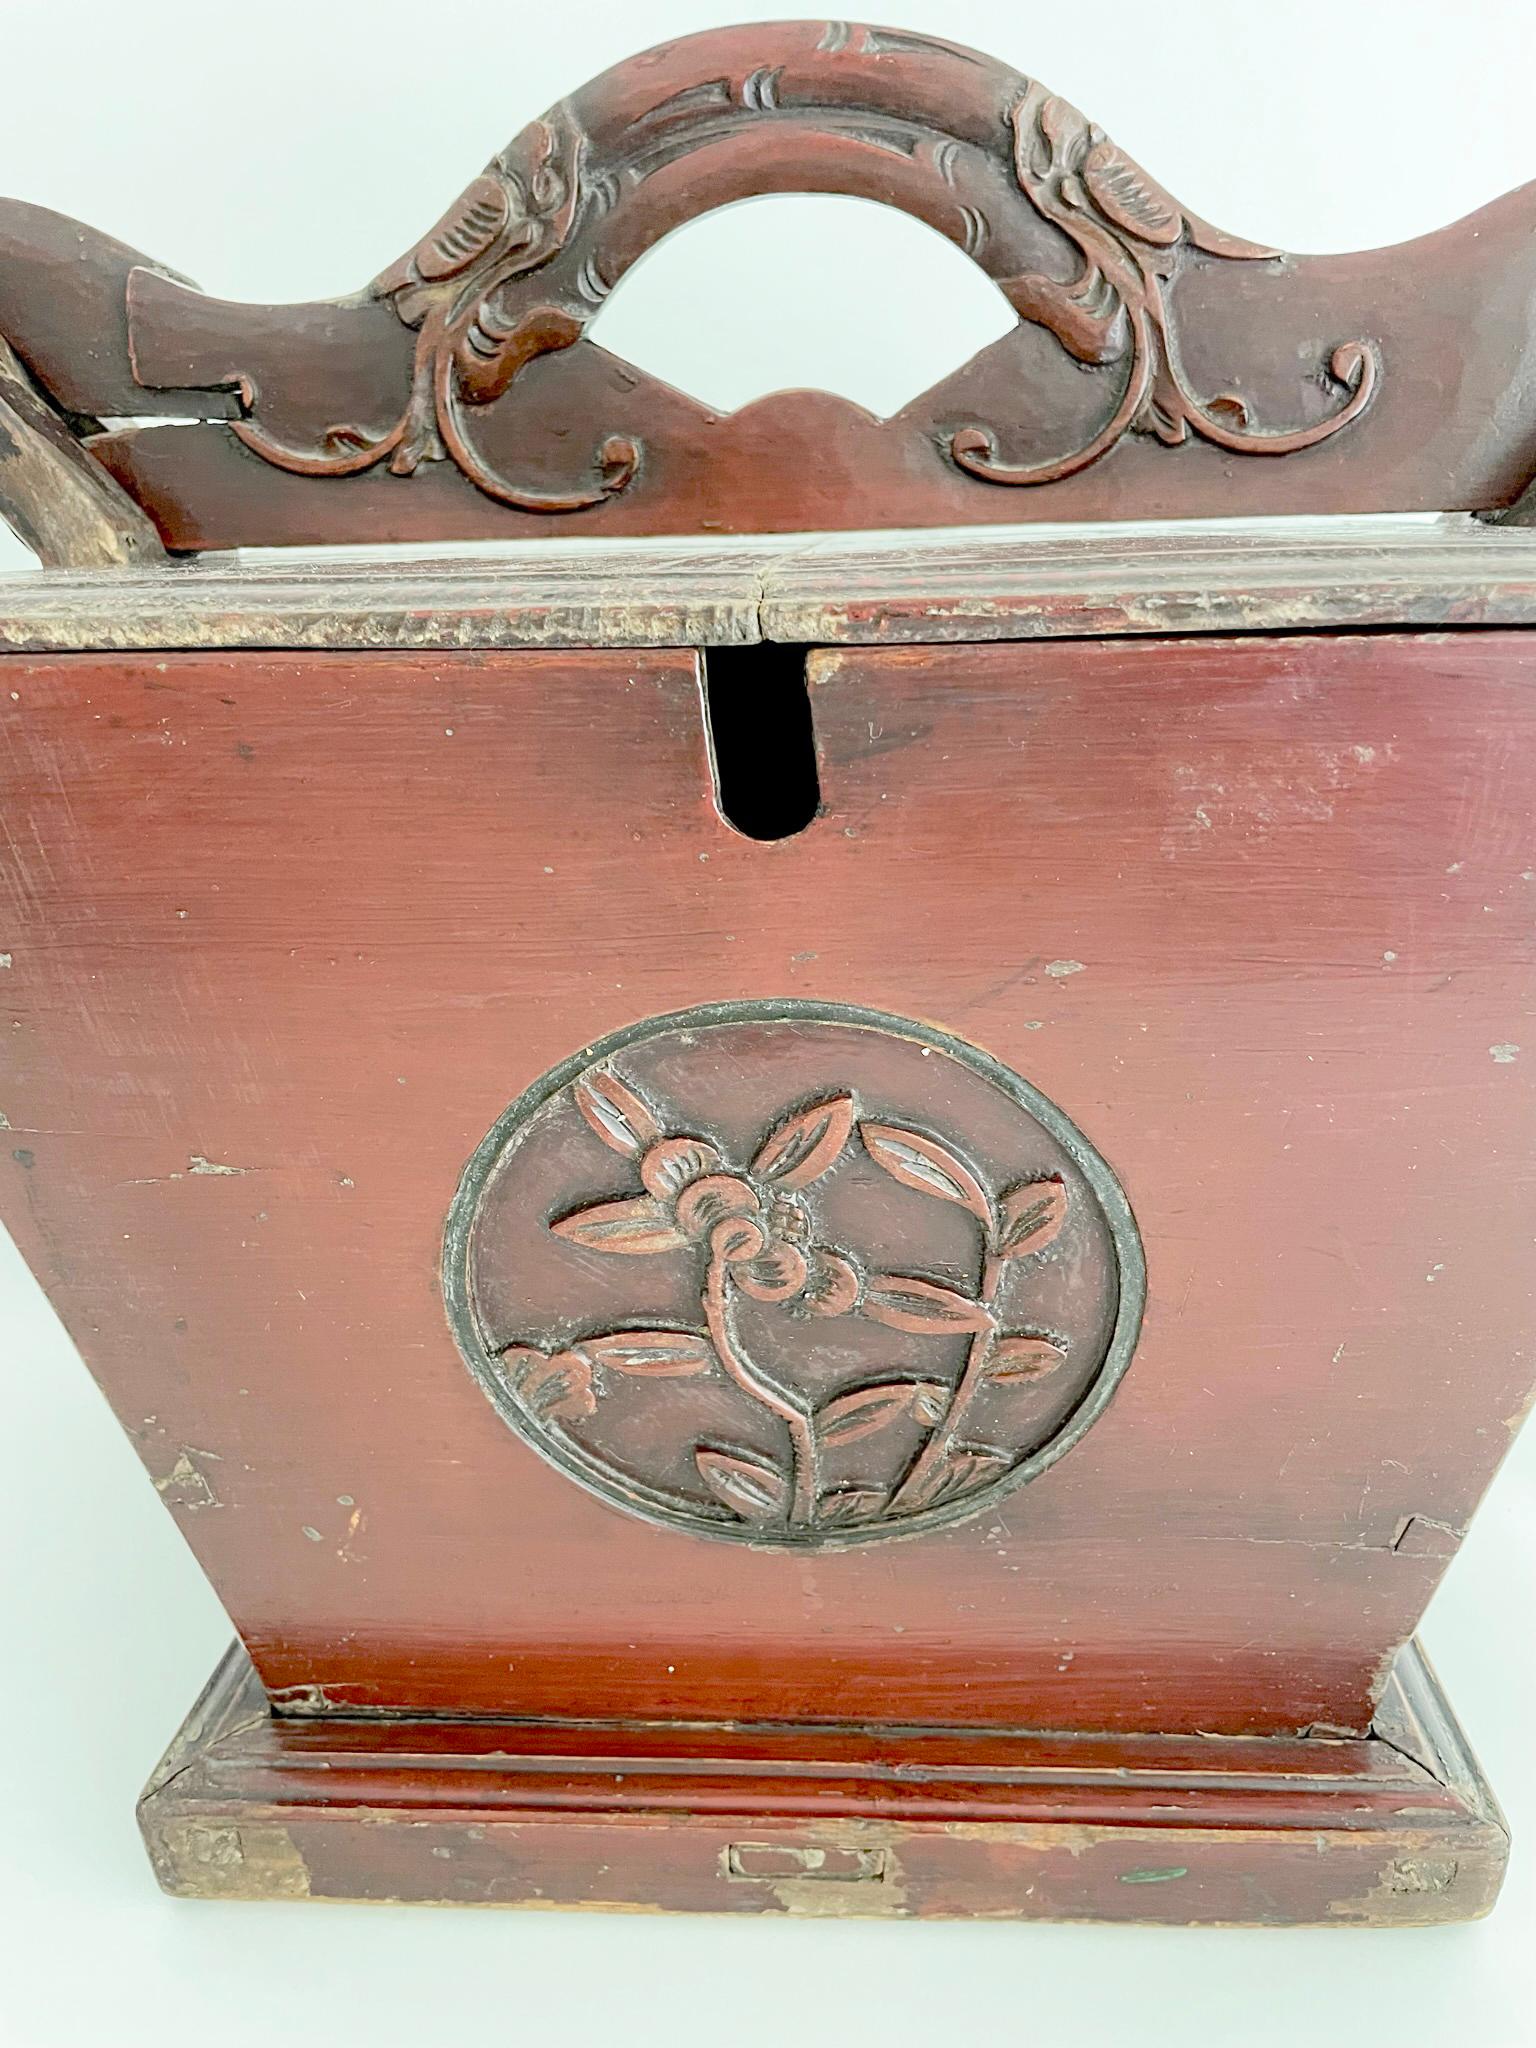 Beautifully carved Qing dynasty tea caddy from Elmwood (yumu), with floral motifs and finished with an oxblood color lacquer. The large size is very usual and was used in a large family compound. The tea caddy is designed to hold and keep warm,